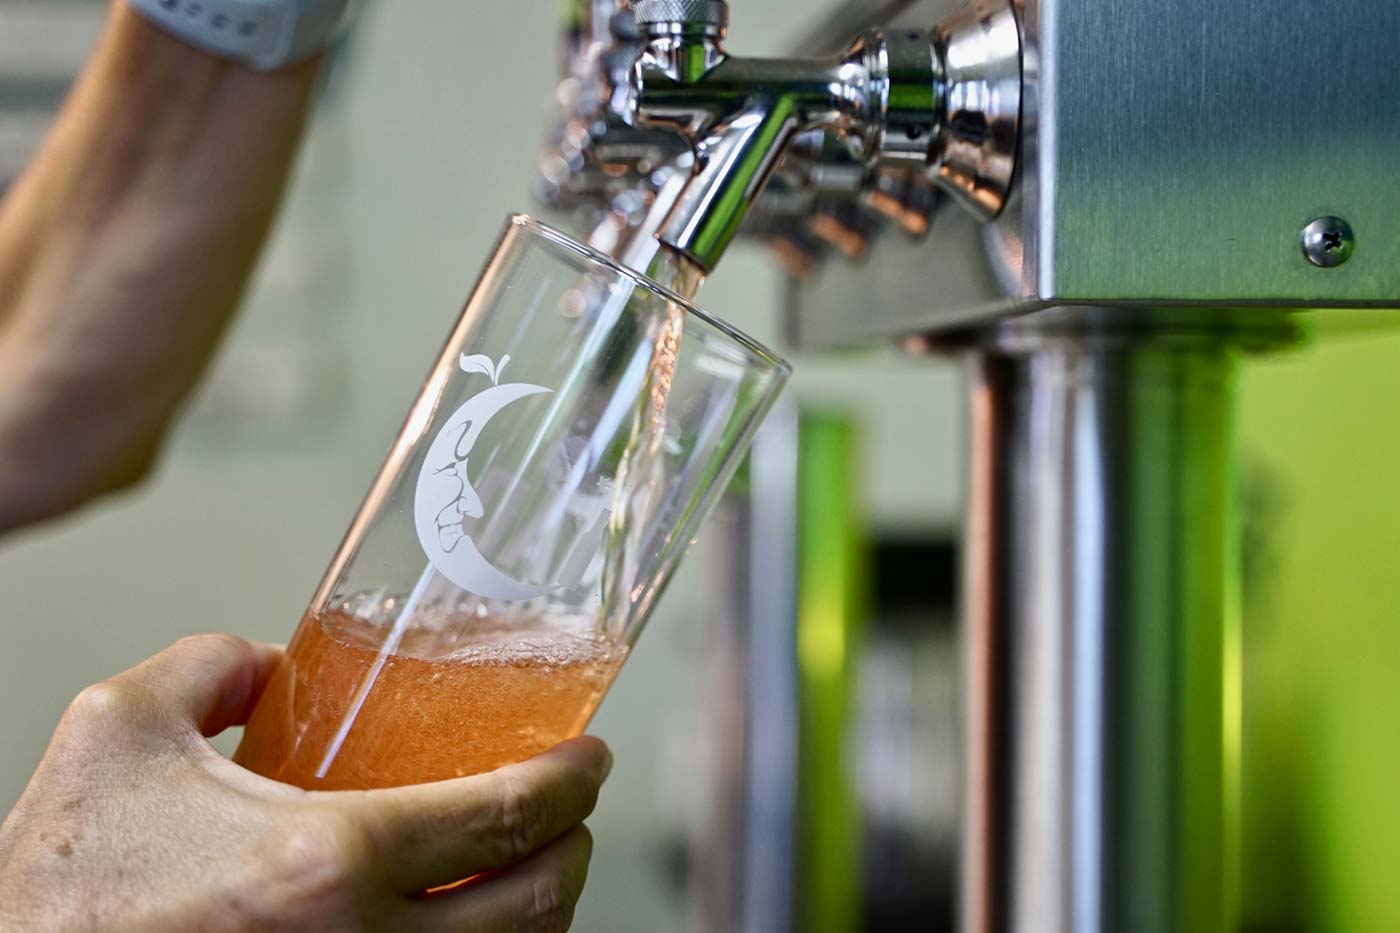 In Ohio, growing consumer demand is driving an expansion in types and flavors of hard ciders.  